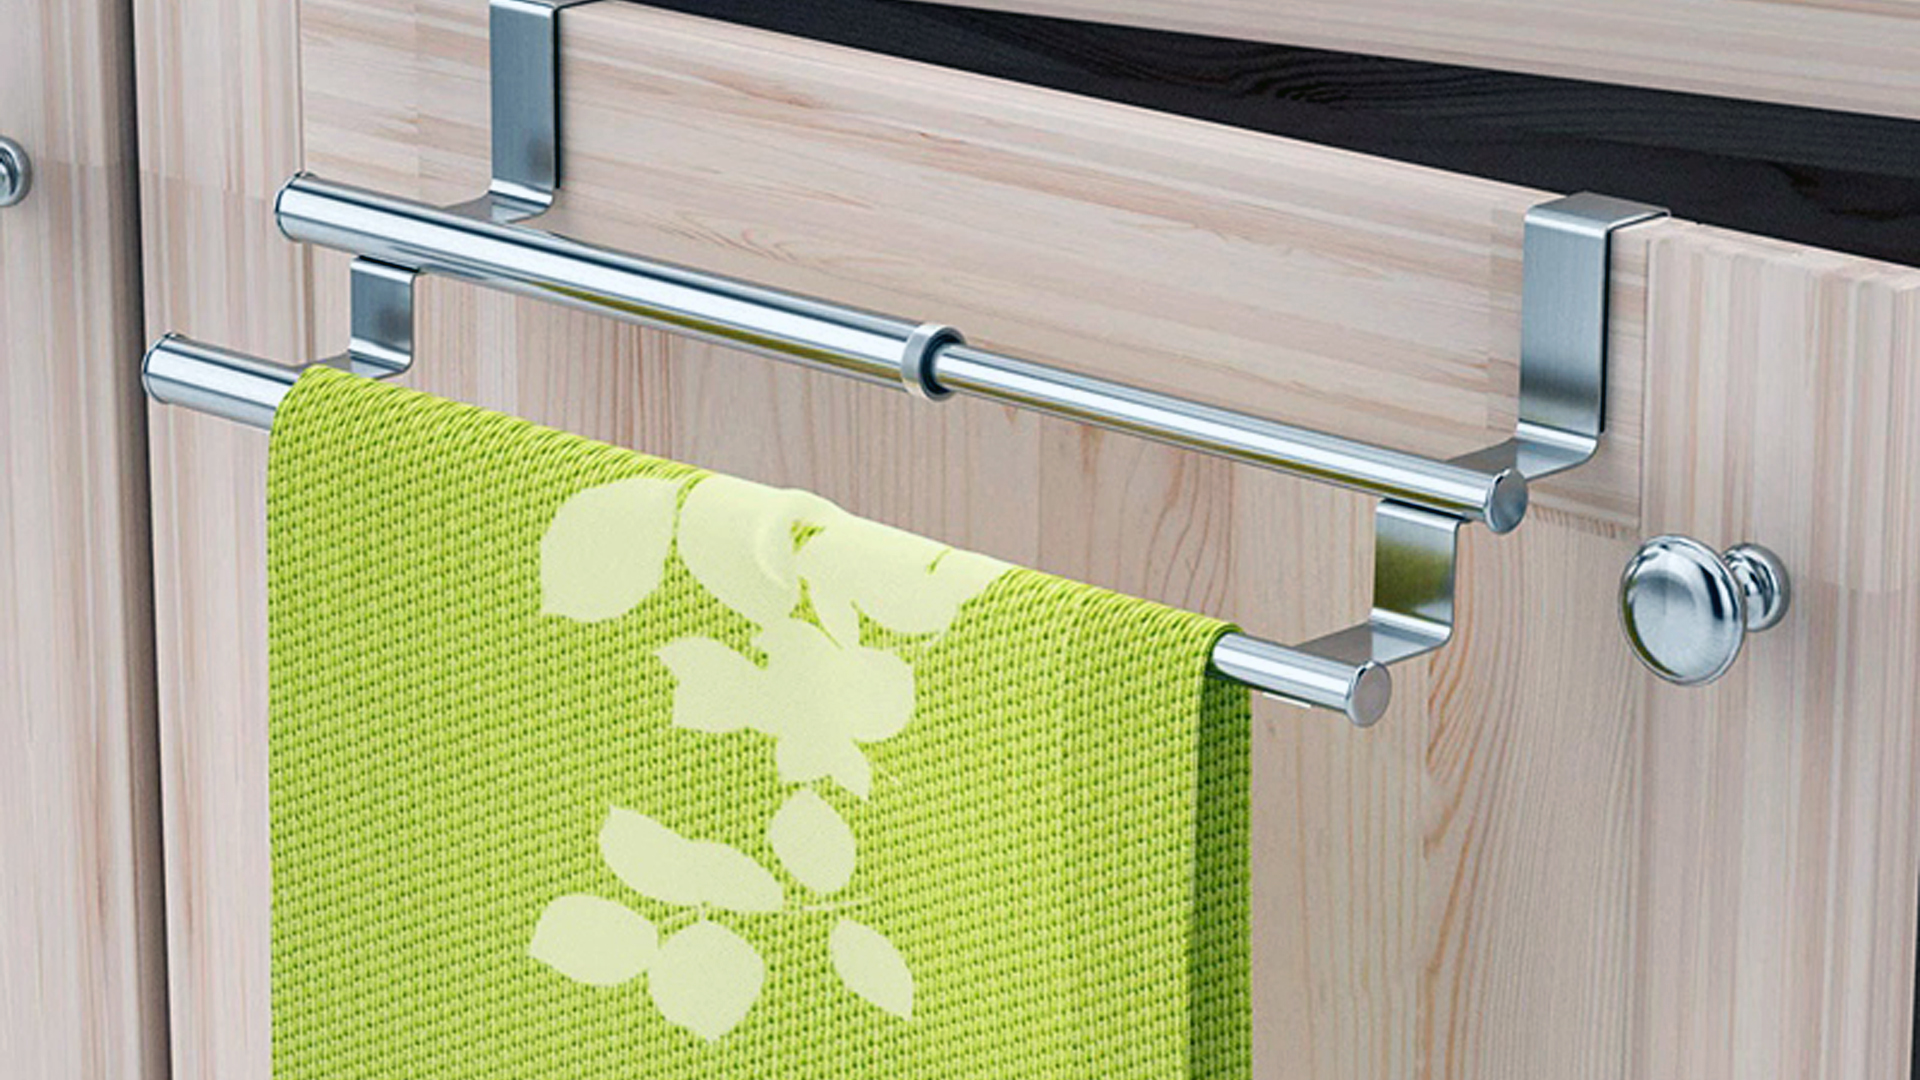 Try Out An Over-The-Cabinet Towel Bar